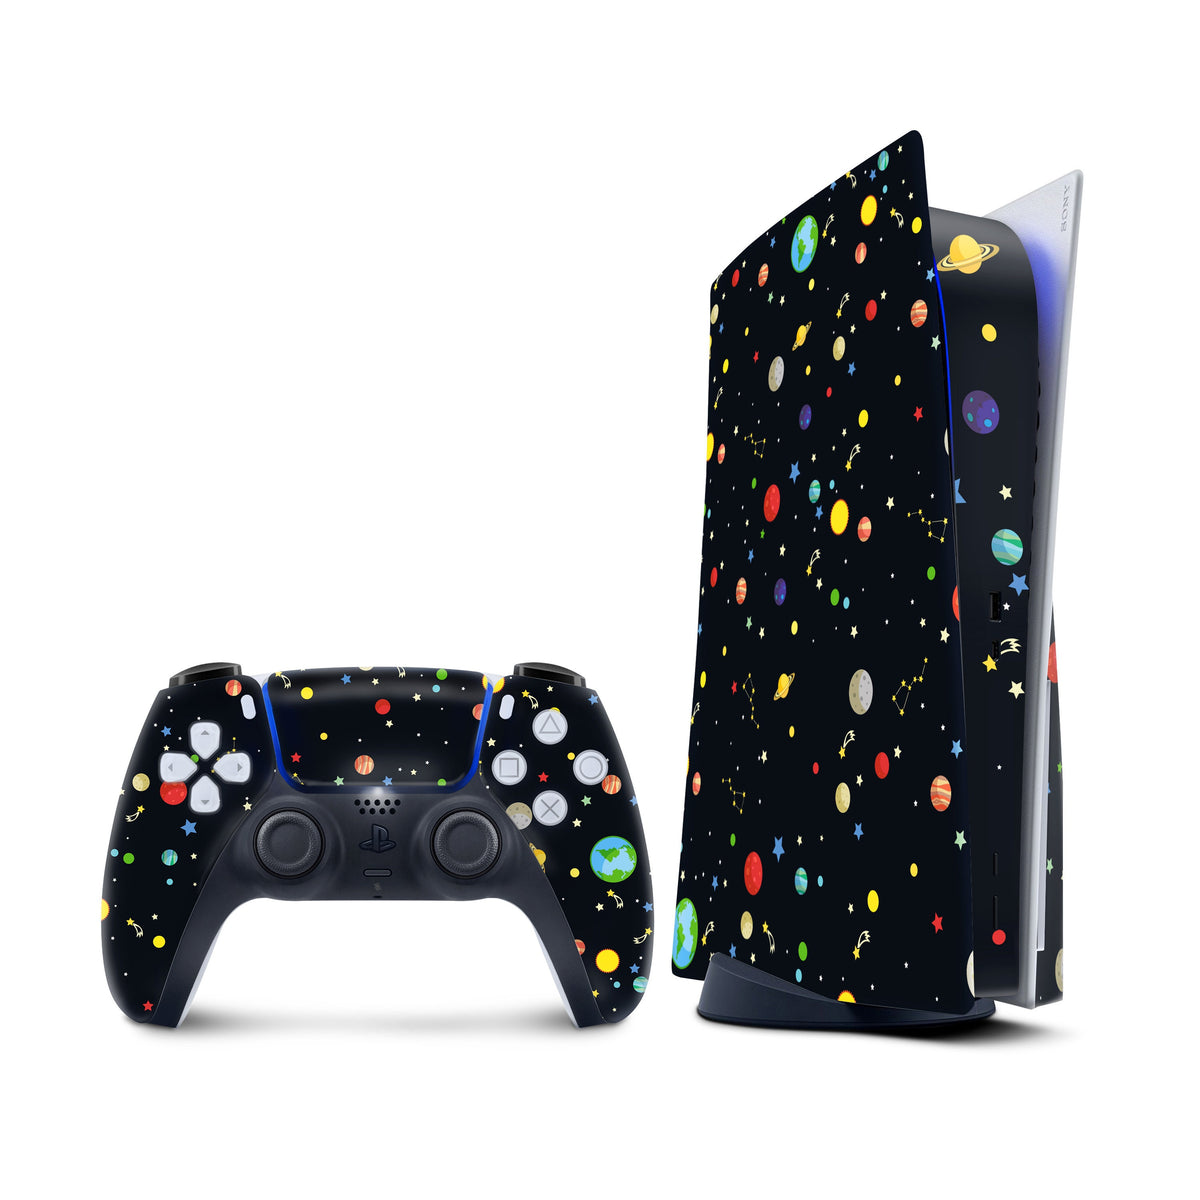 Ps5 skin galaxy, Sony Playstation 5 controller skin Planets, Vinyl 3m stickers Full wrap cover